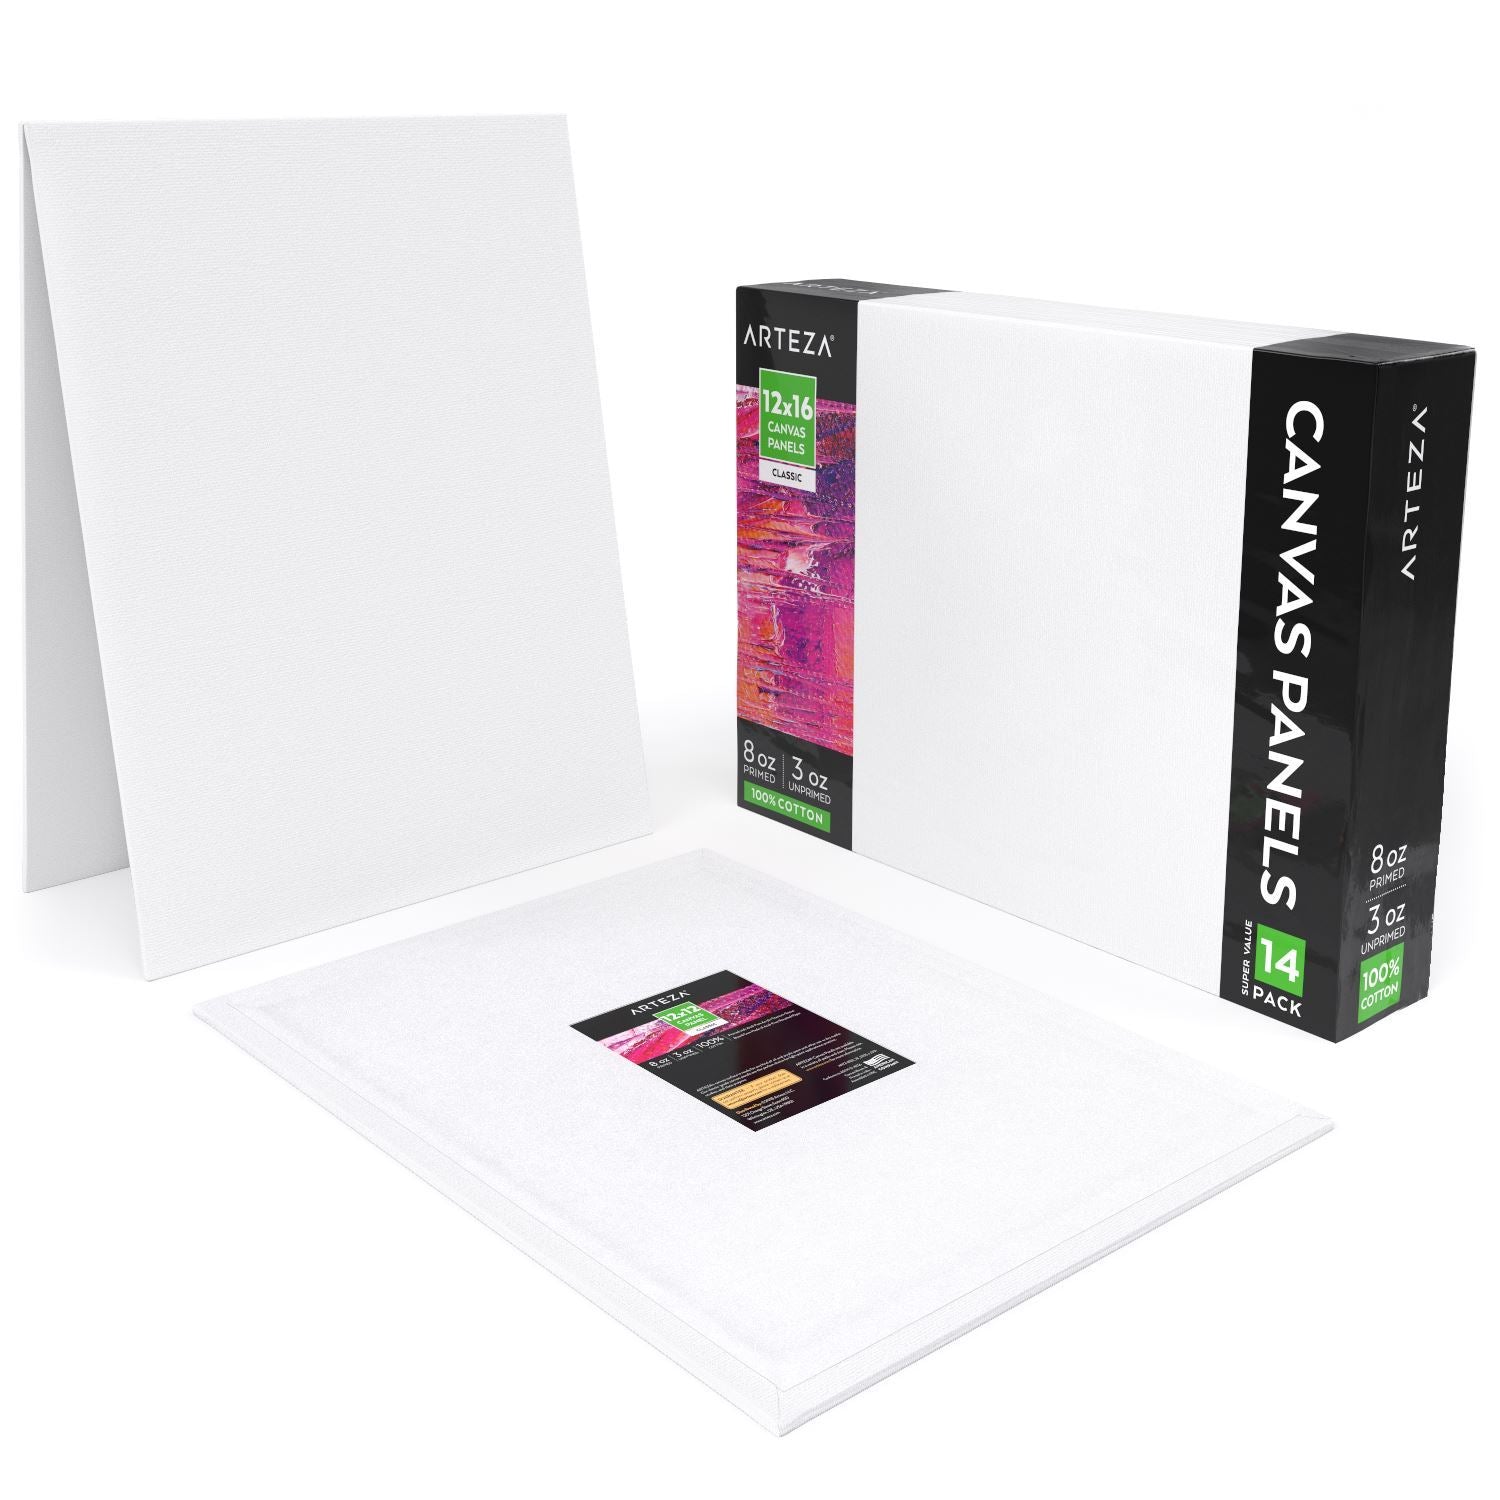 Classic Canvas Panels, 5 x 7 - Pack of 14